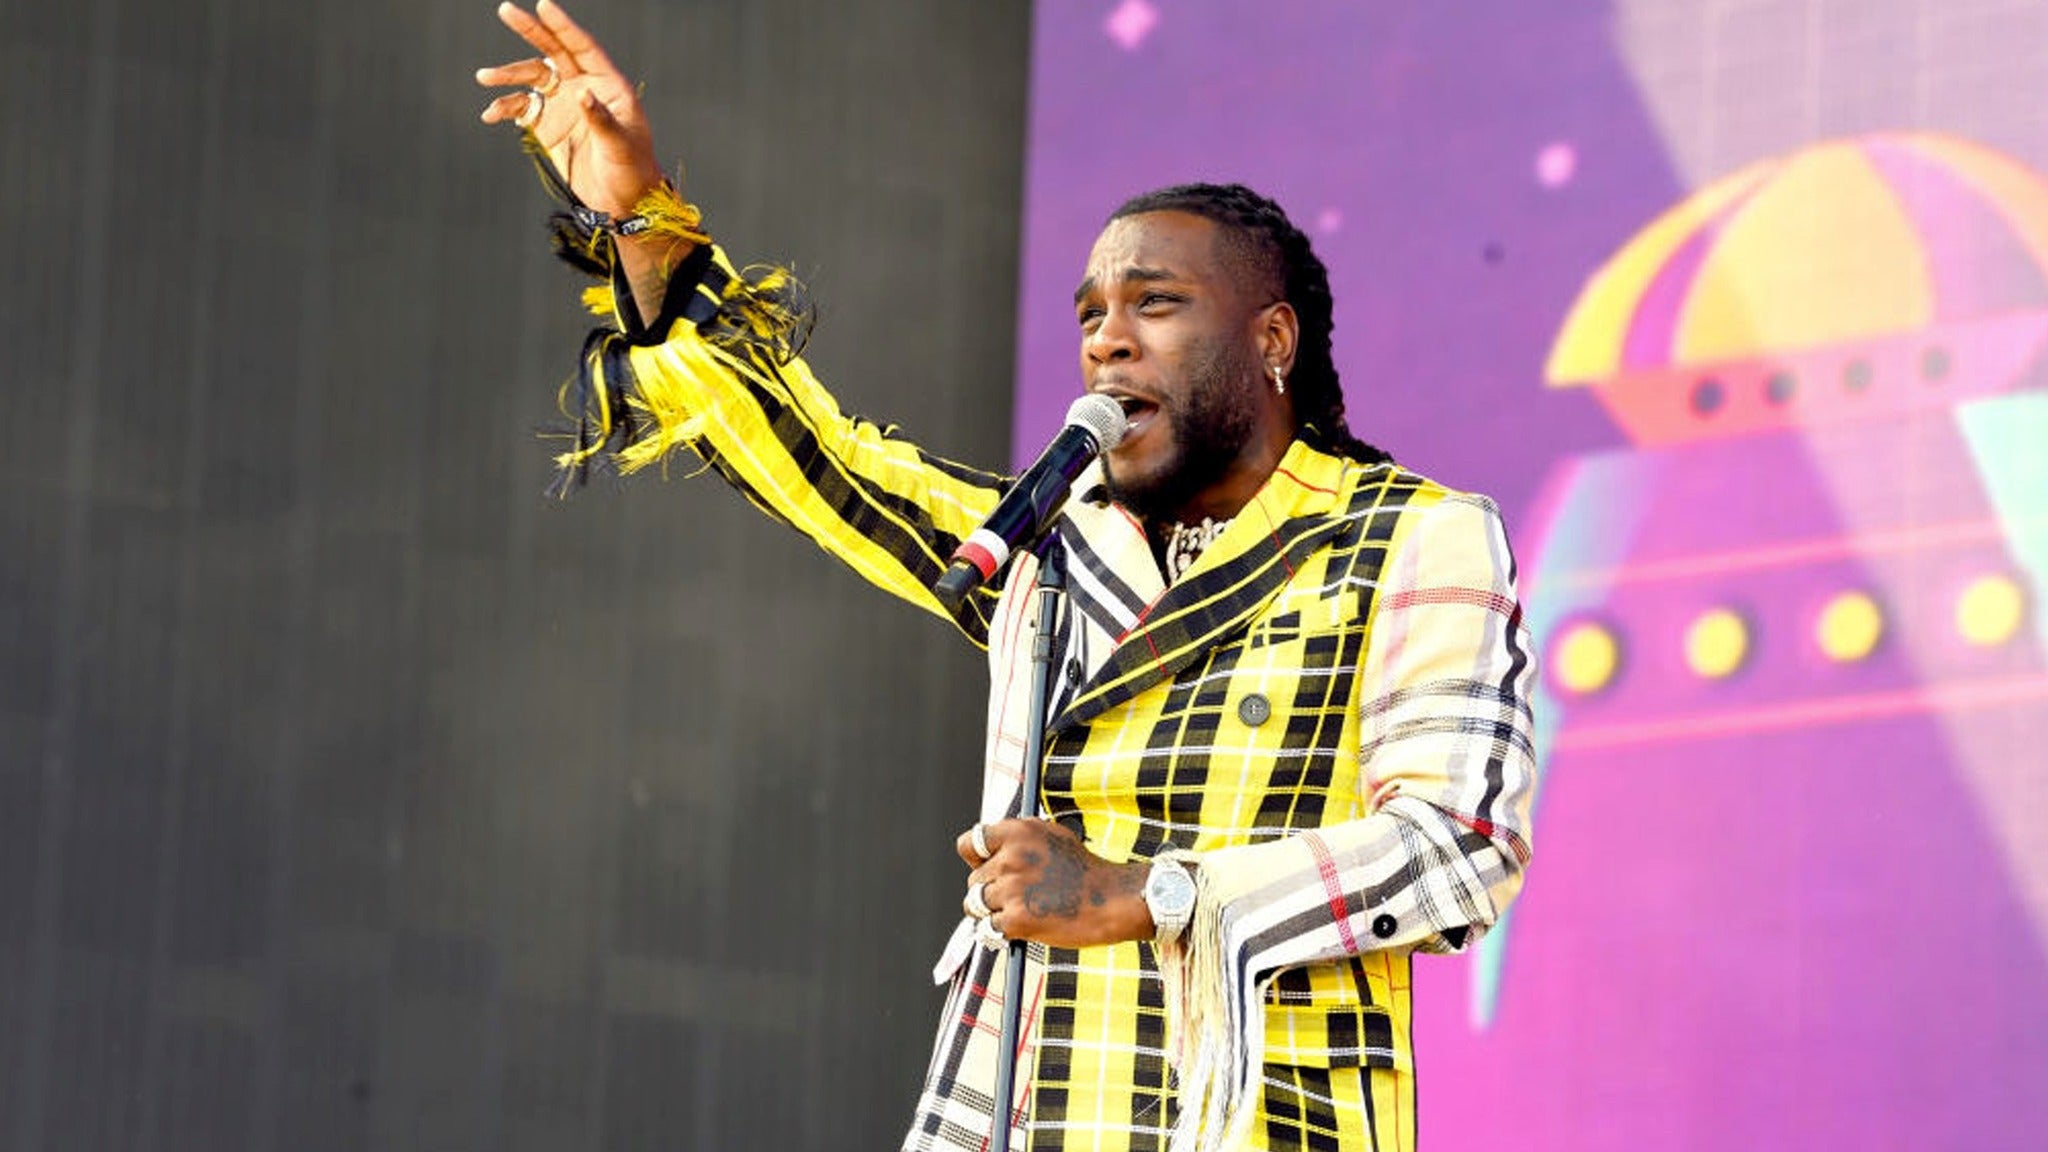 Burna Boy - Twice As Tall Tour in Brooklyn promo photo for Live Nation presale offer code